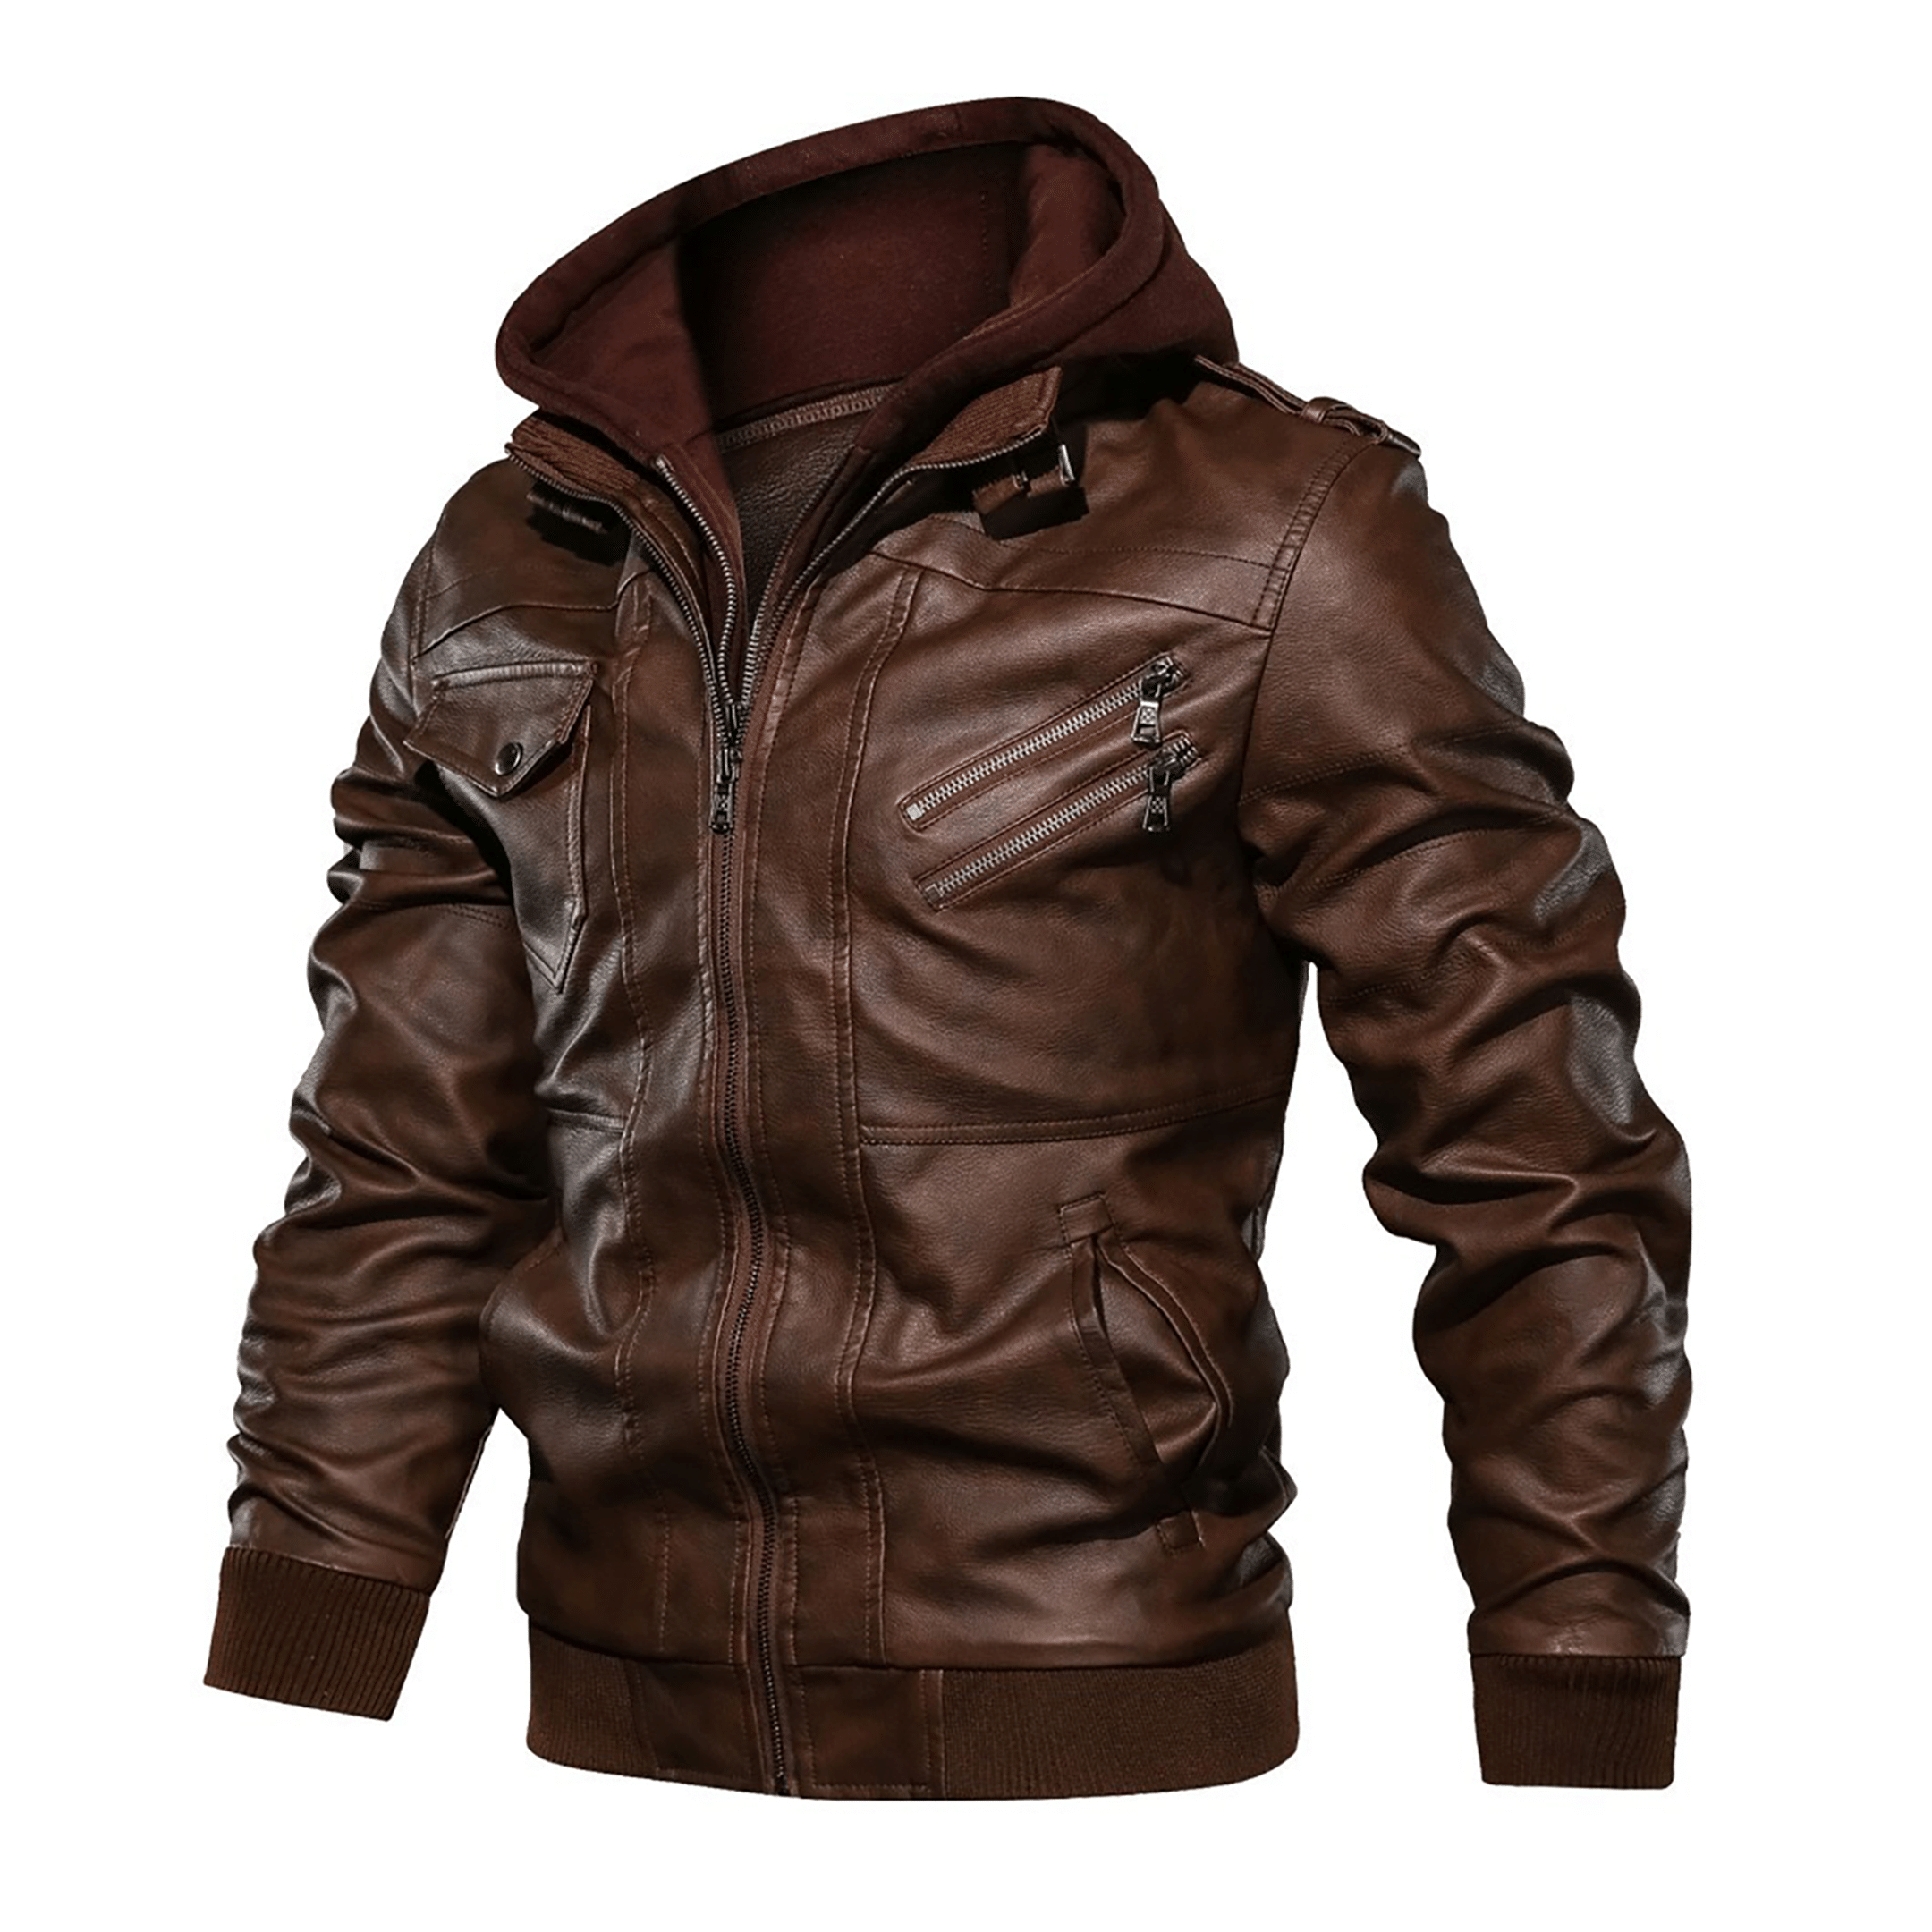 Top leather jackets and latest products 113